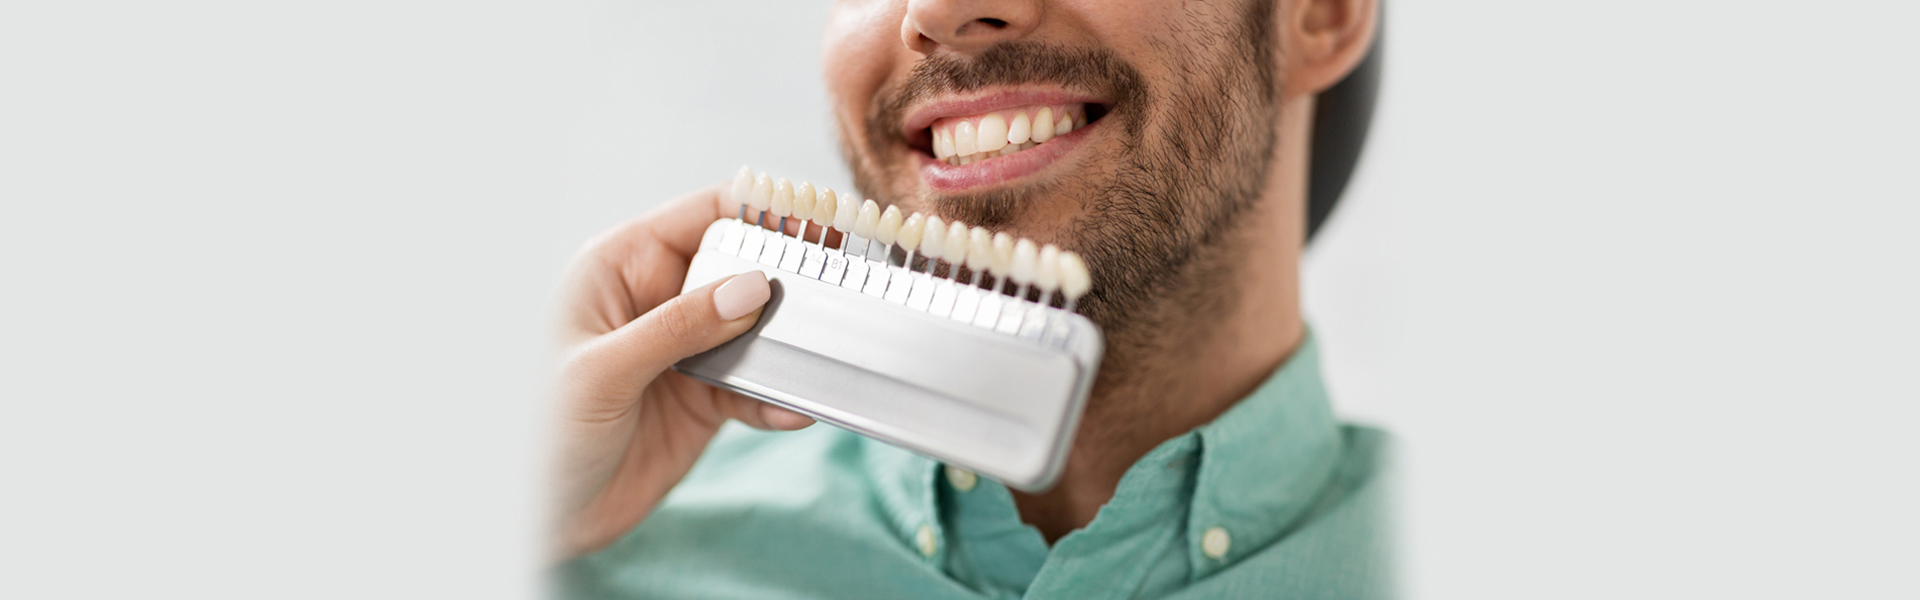 Veneers: How to Maintain Them and Keep Them Looking Like New